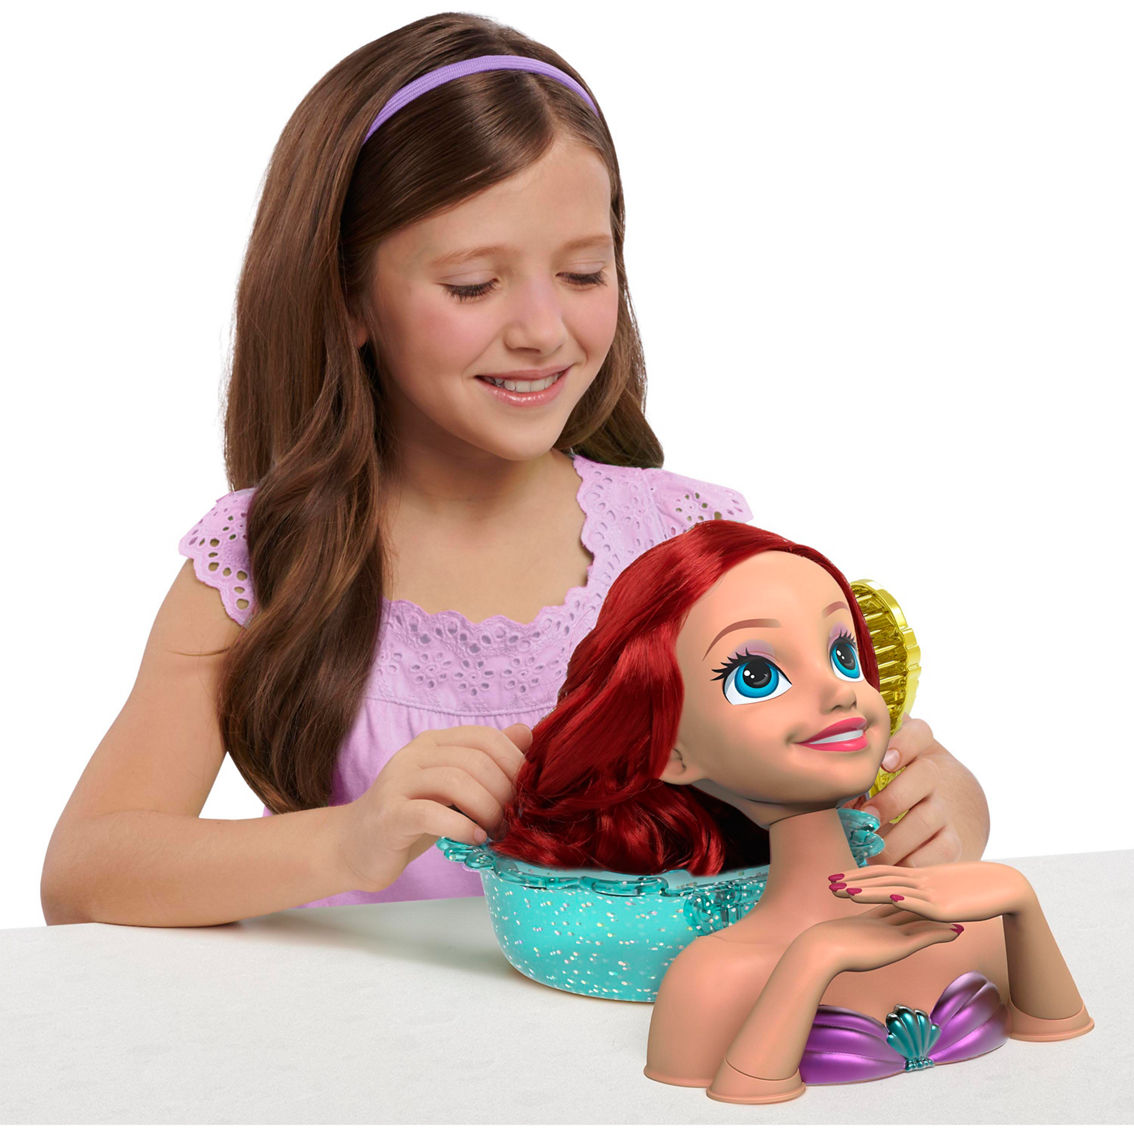 Disney Princess Deluxe Spa Ariel Styling Head - Image 2 of 2